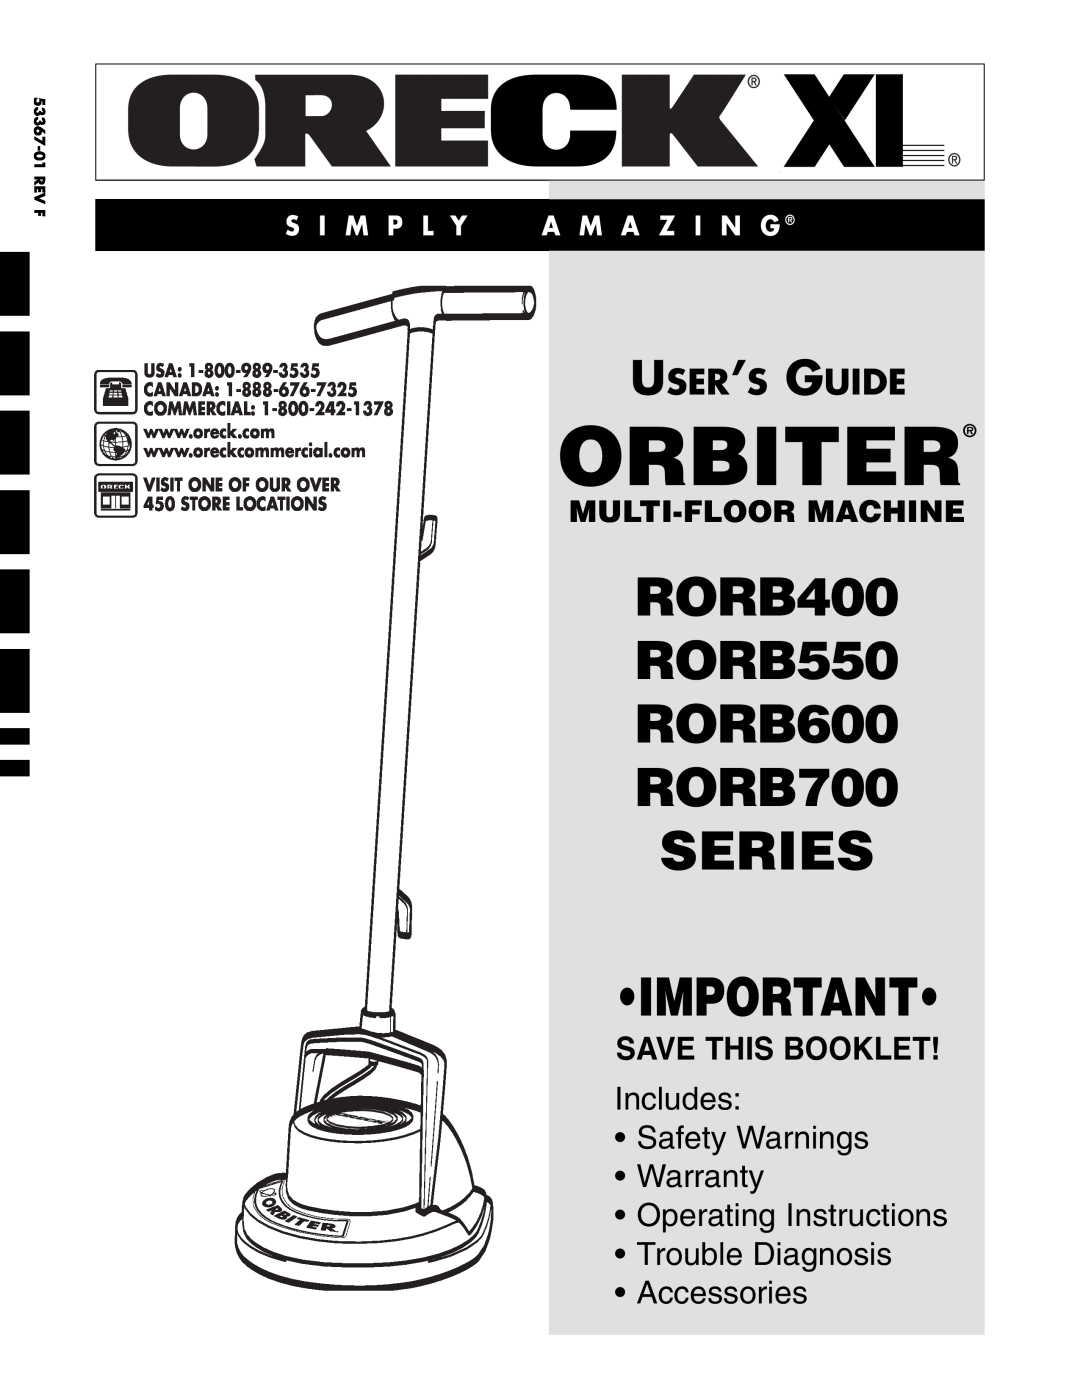 Oreck warranty Orbiter, RORB400 RORB550 RORB600 RORB700 SERIES, User’S Guide, Save This Booklet, Accessories, 53367-01 